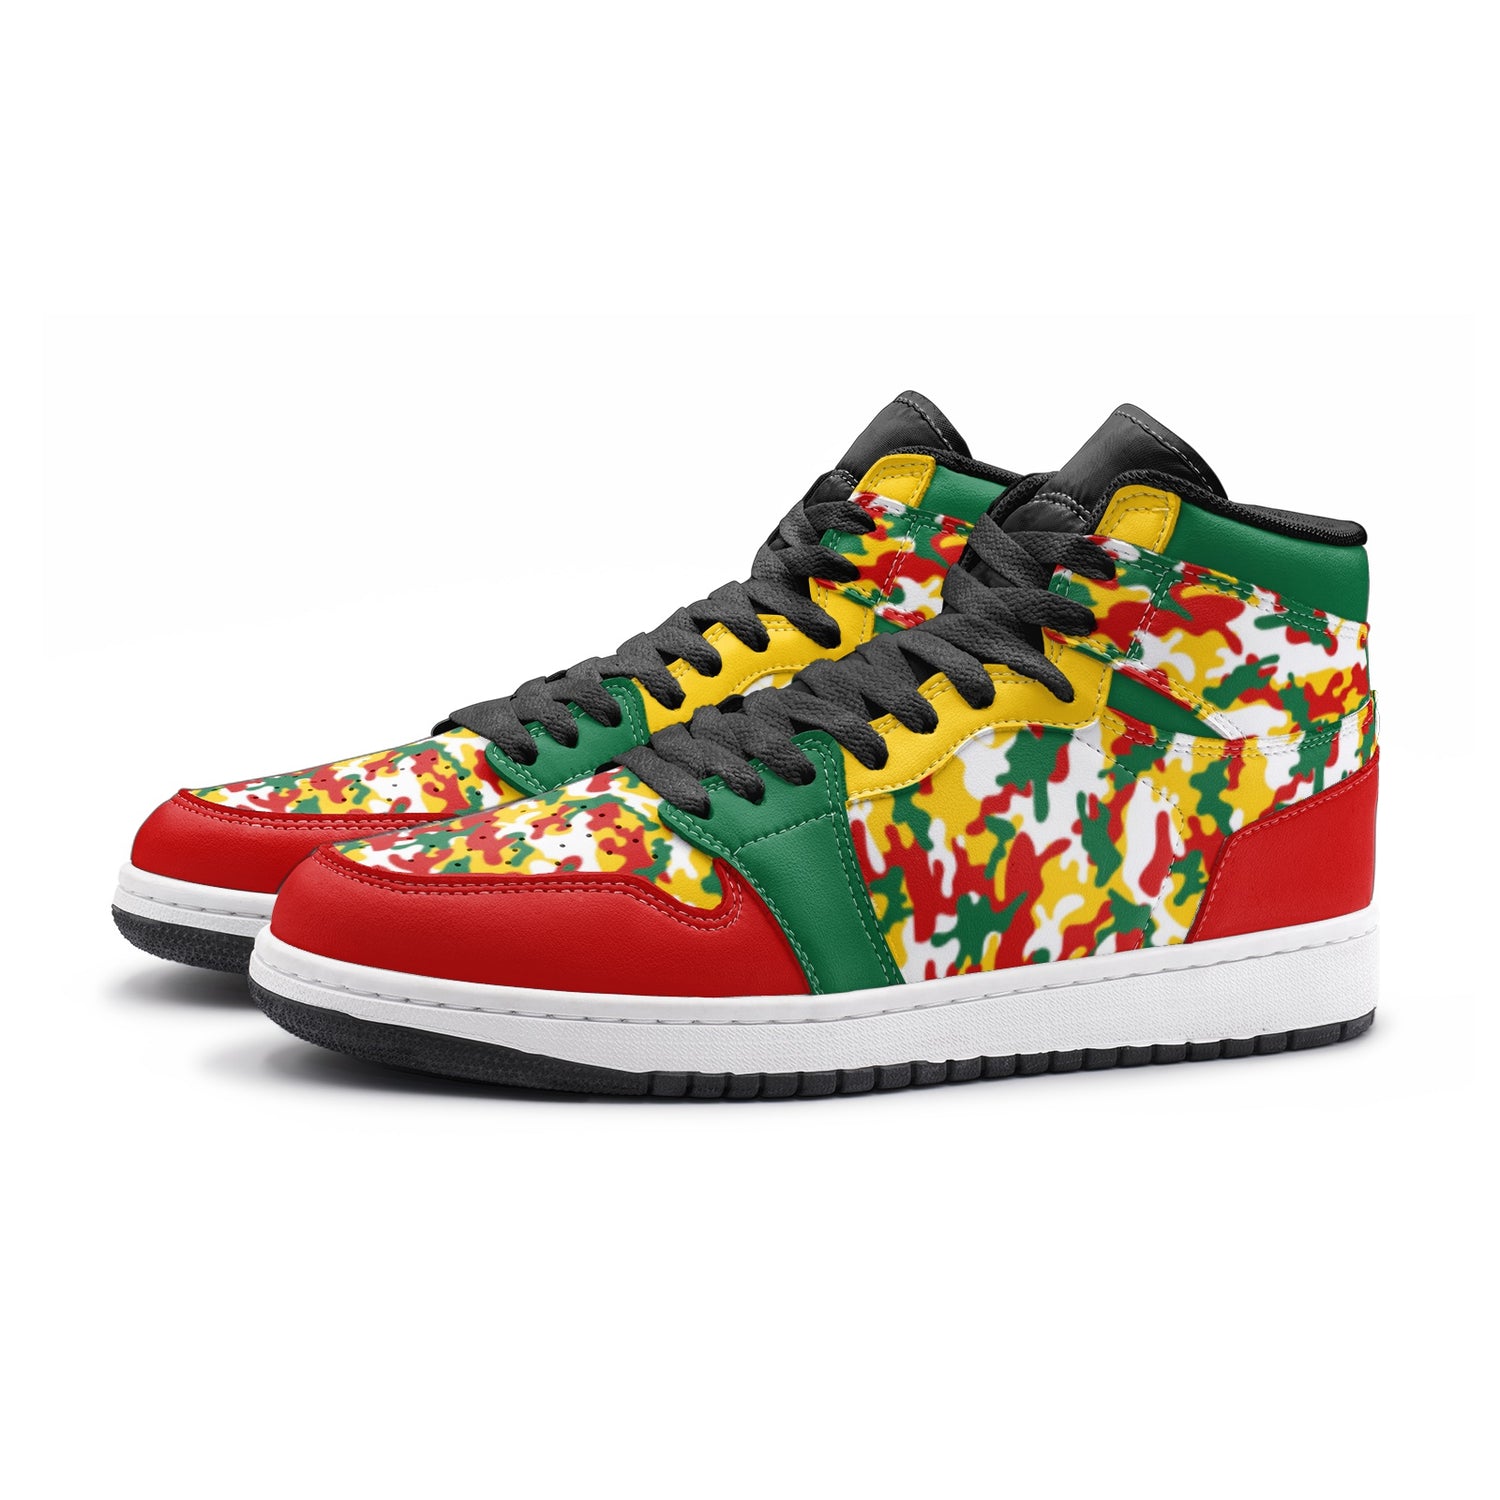 rasta mens shoes, jamaican and rasta shoes in colors for men and women